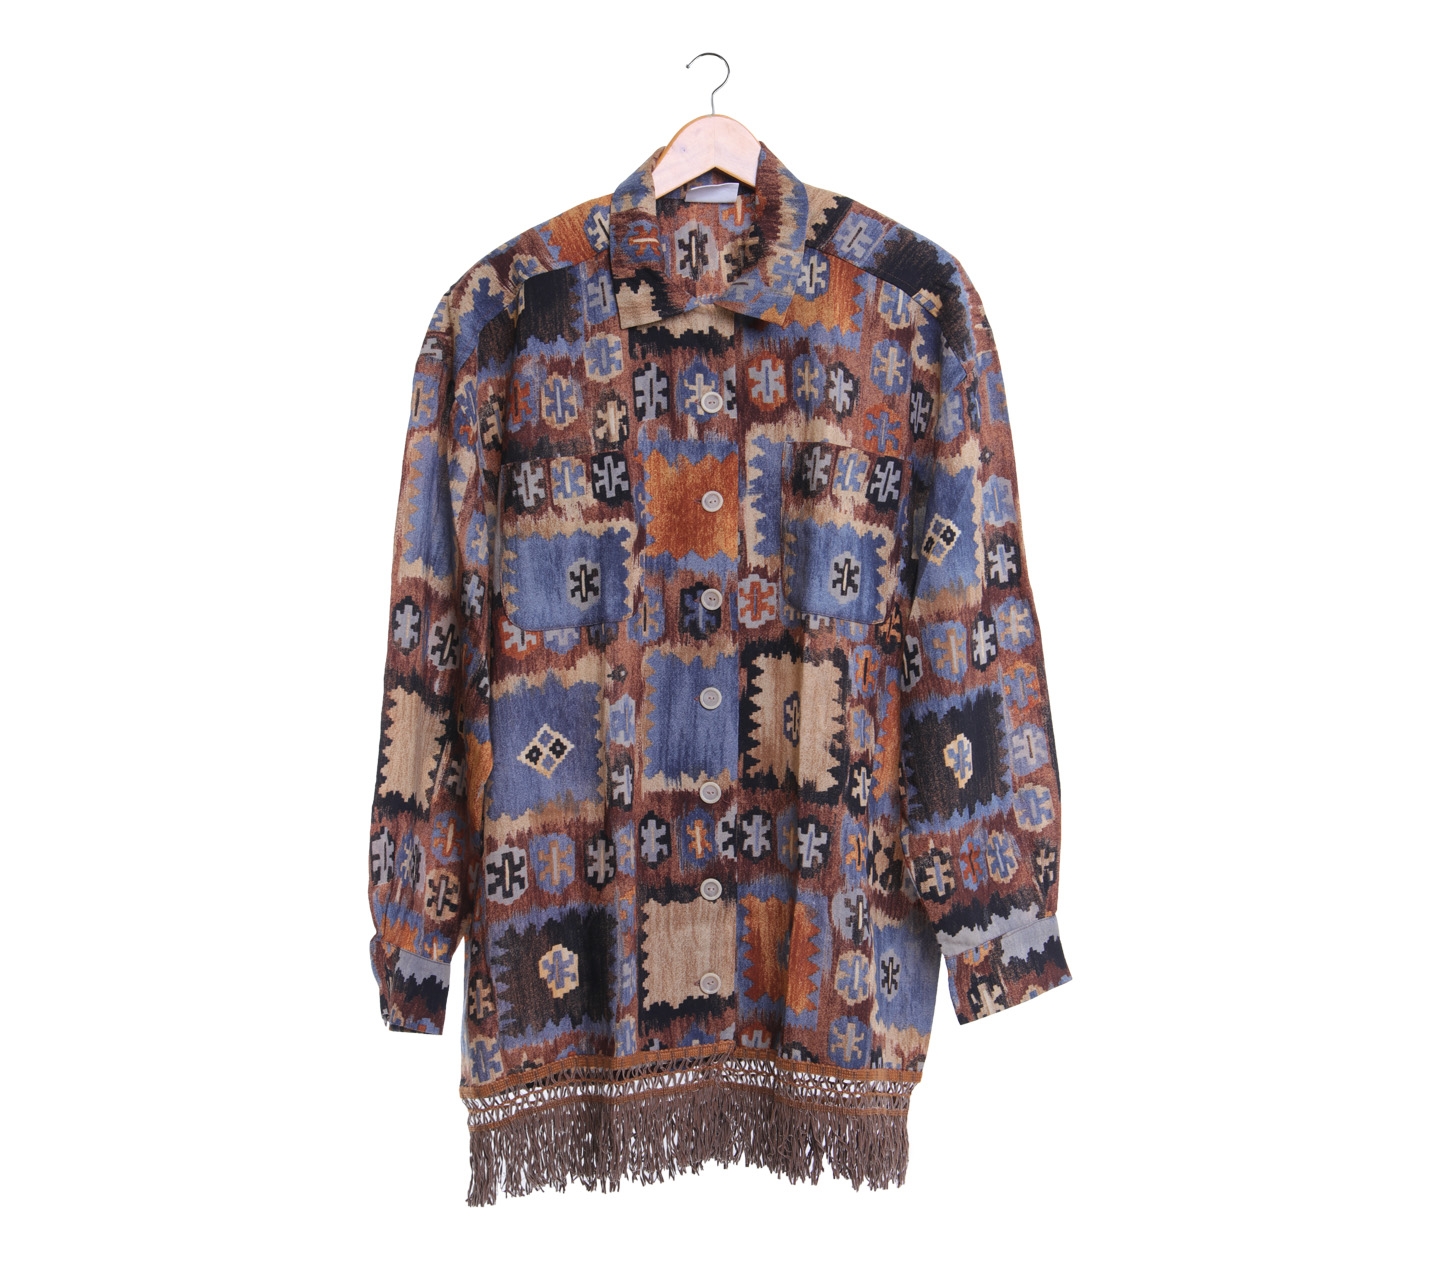 Betty Barclay Multi Colour Patterned Shirt